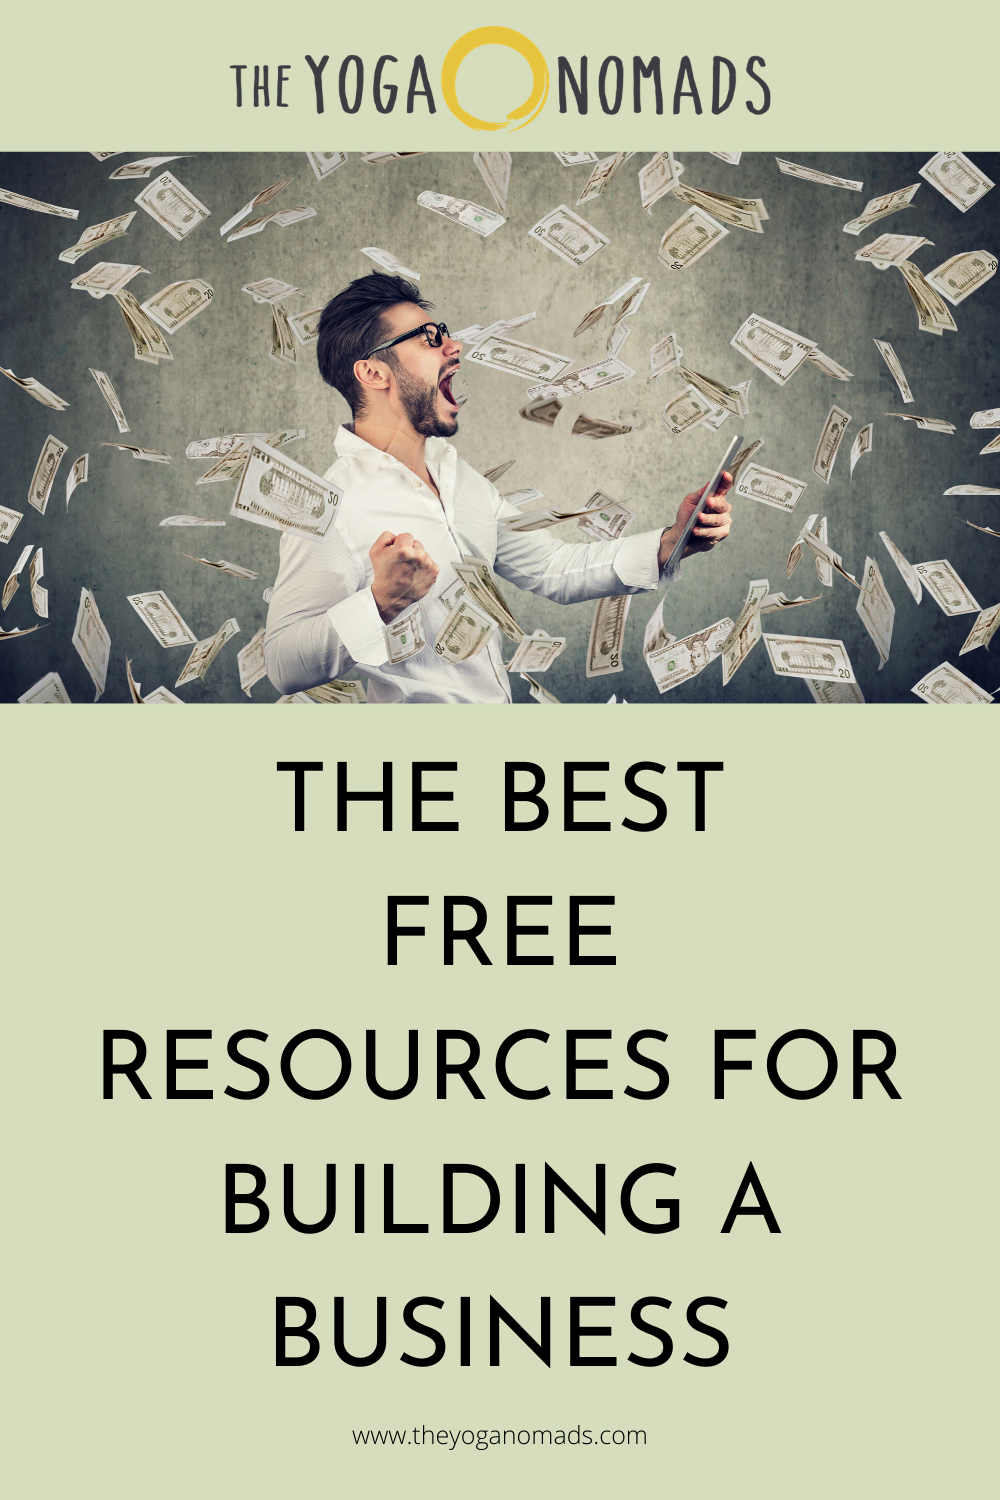 The Best Free Resources for Building a Business